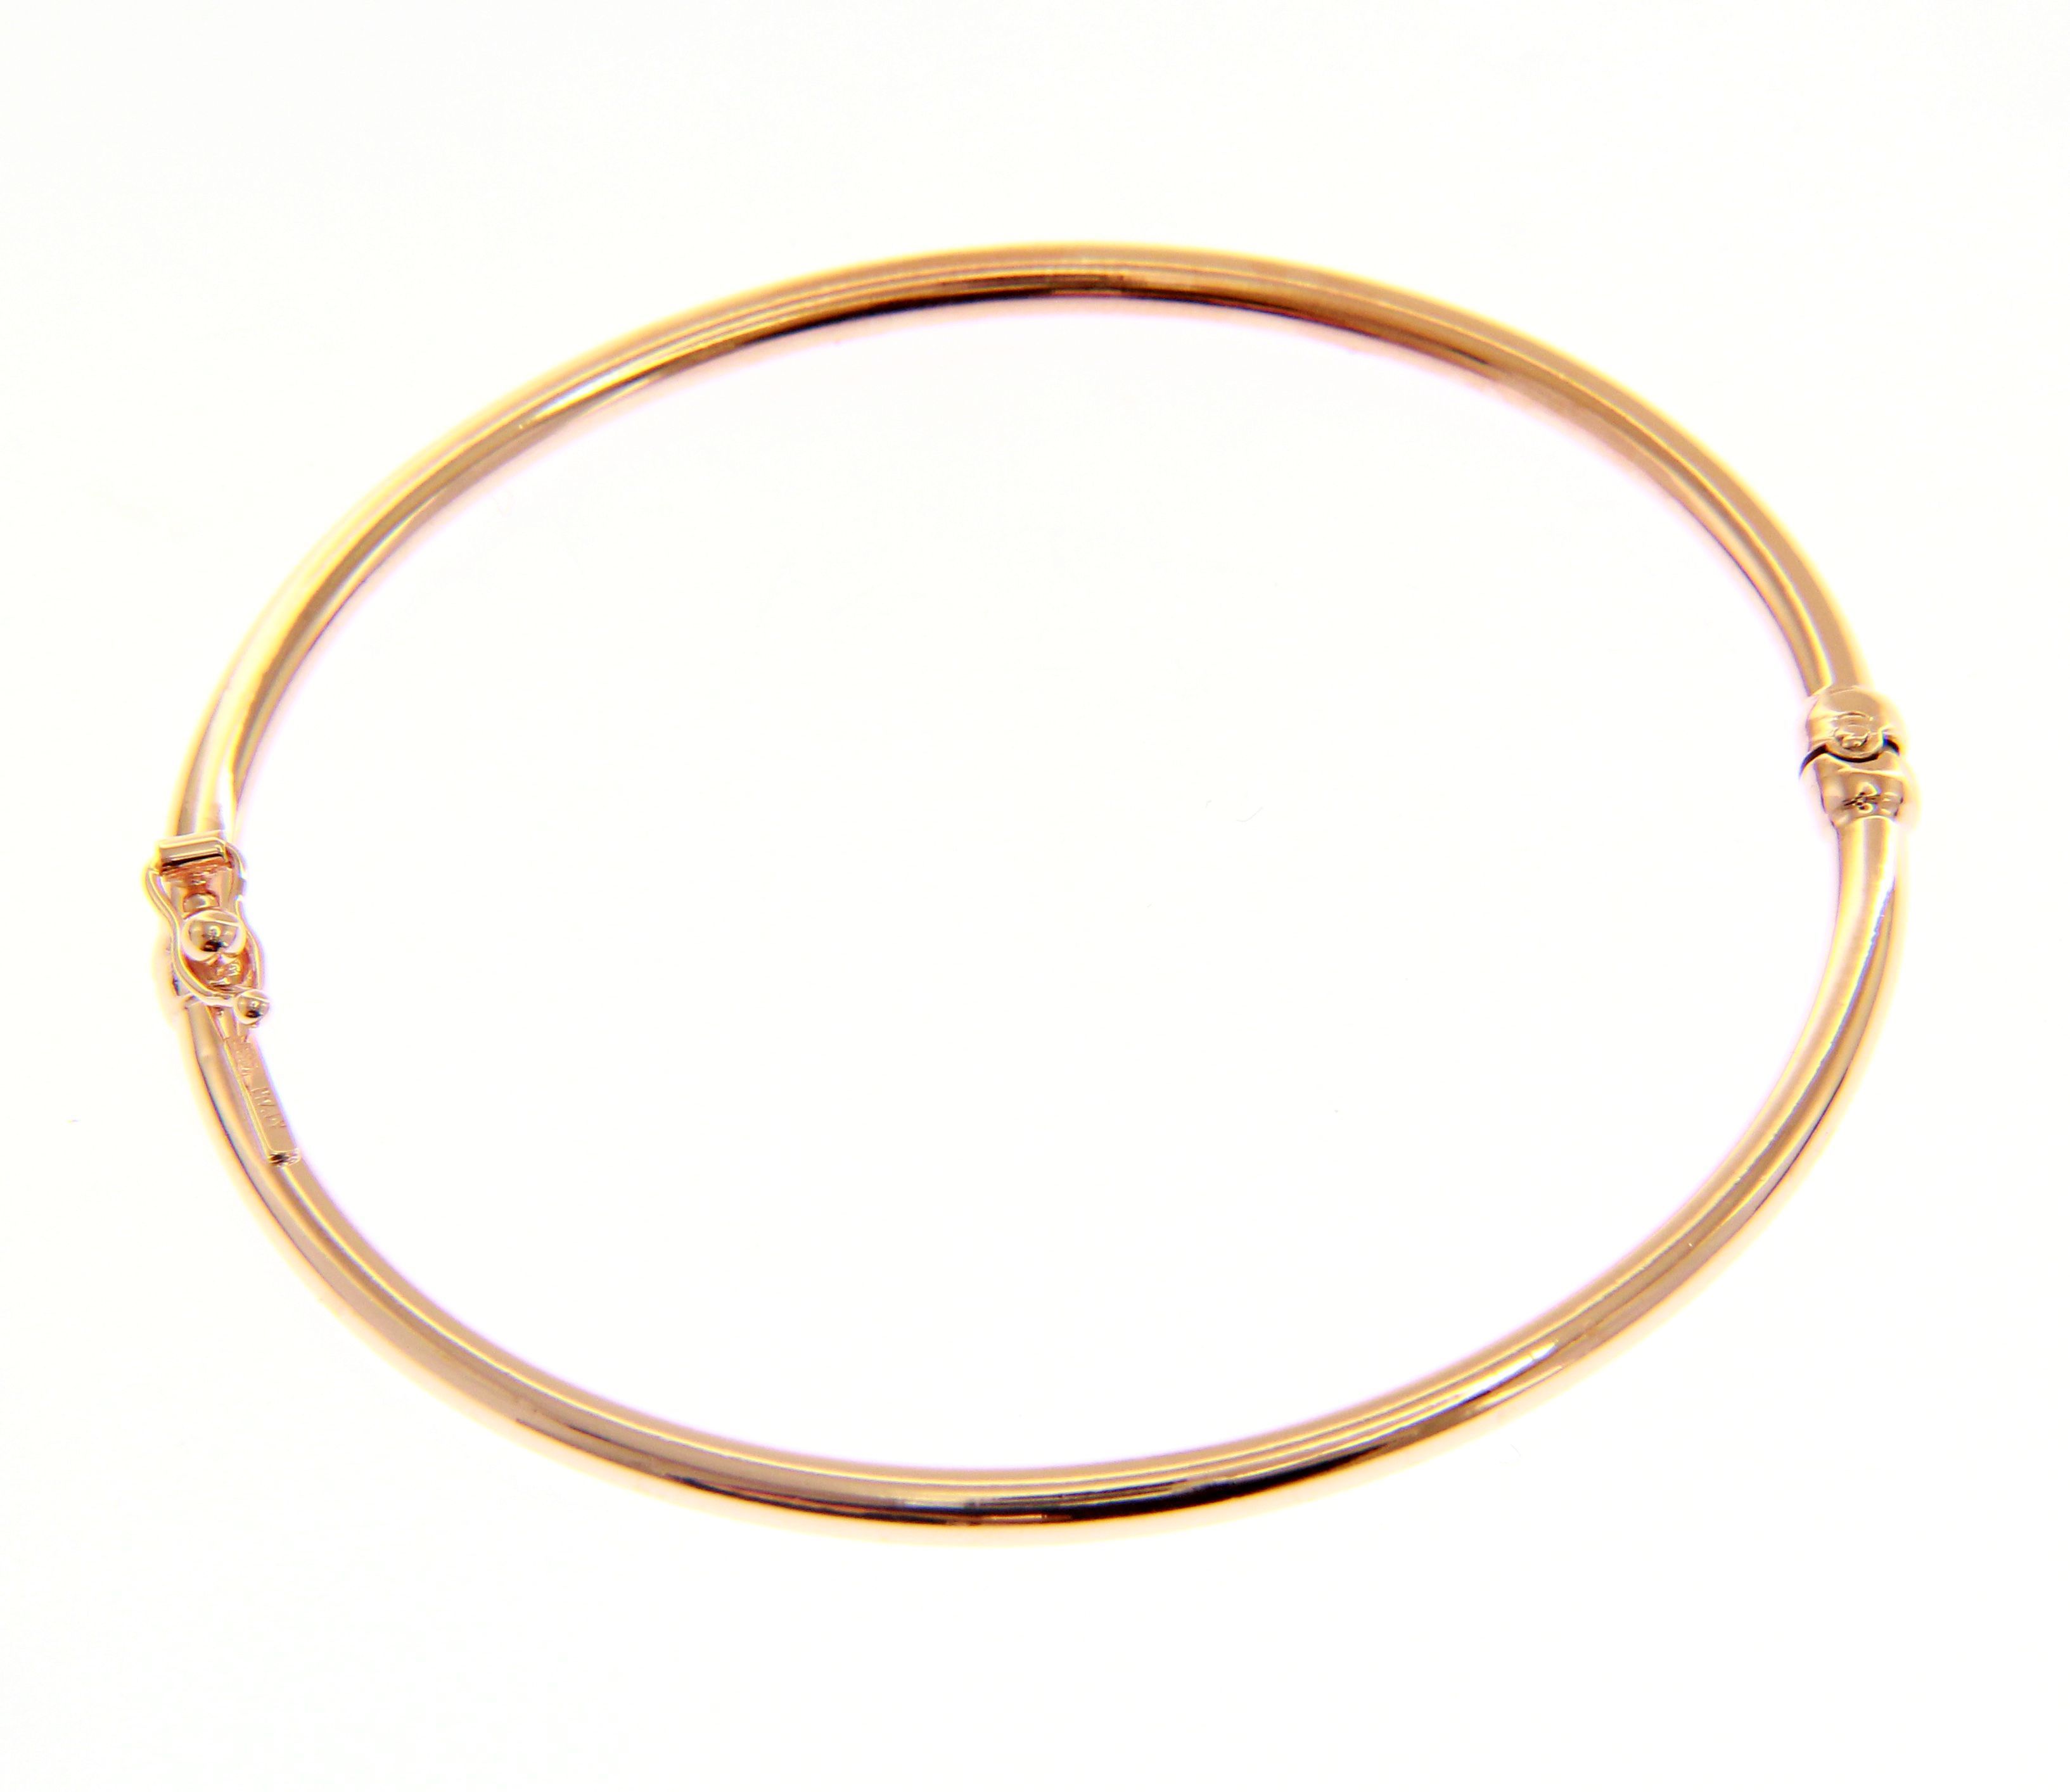 Rose gold oval bracelet with clasp k14 (code S210925)